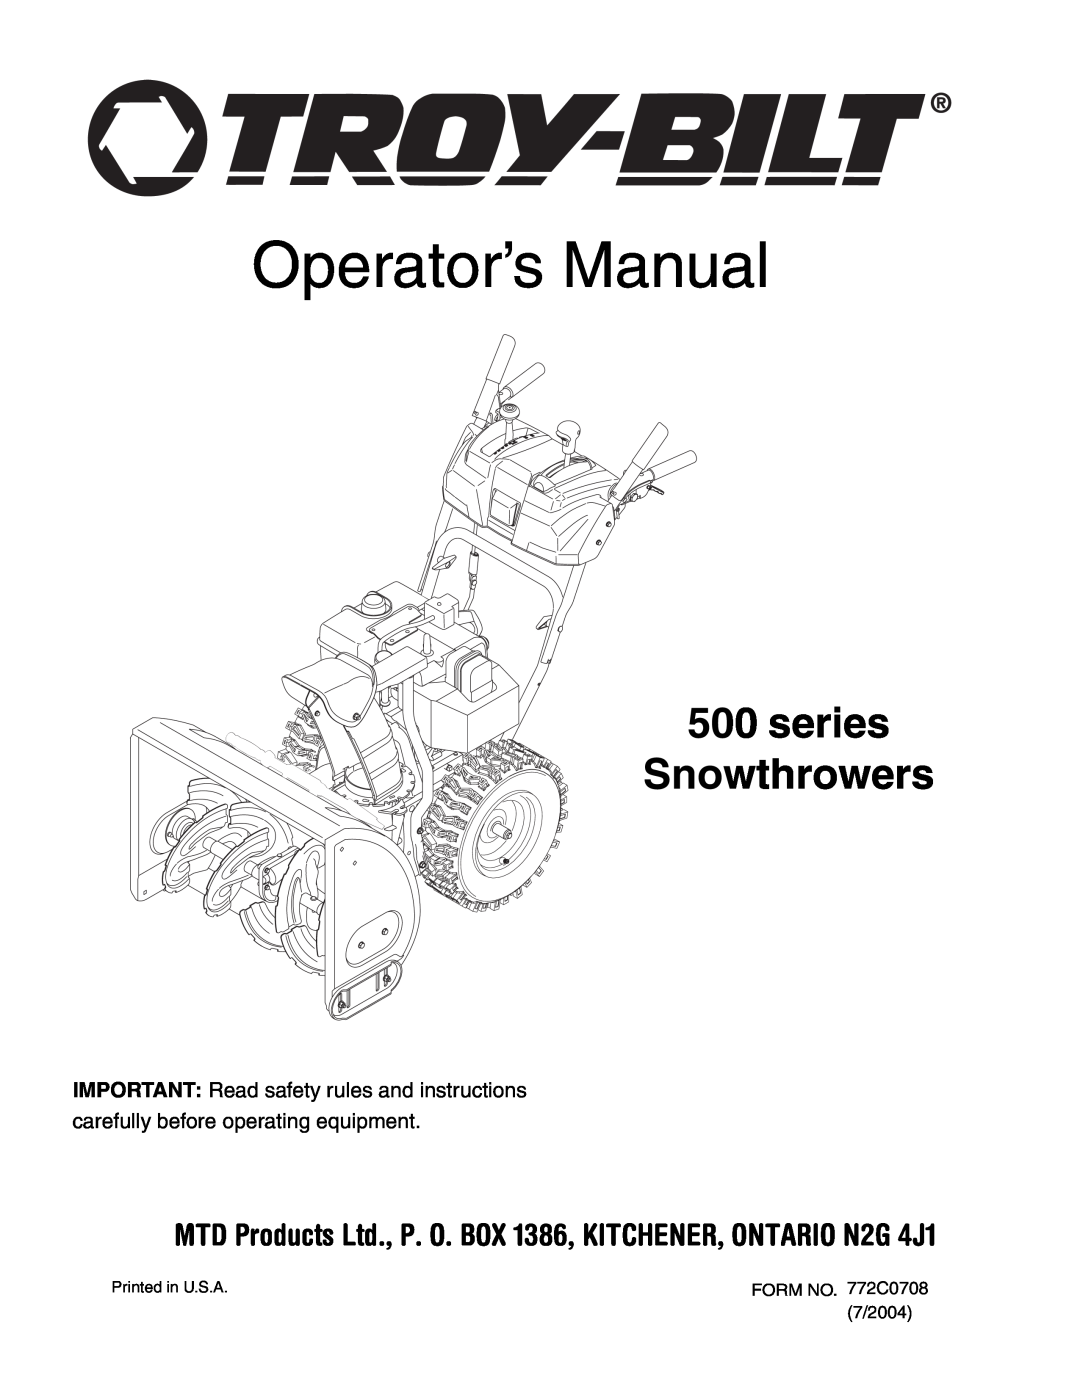 Troy-Bilt 500 series manual Operator’s Manual, series Snowthrowers, IMPORTANT Read safety rules and instructions 